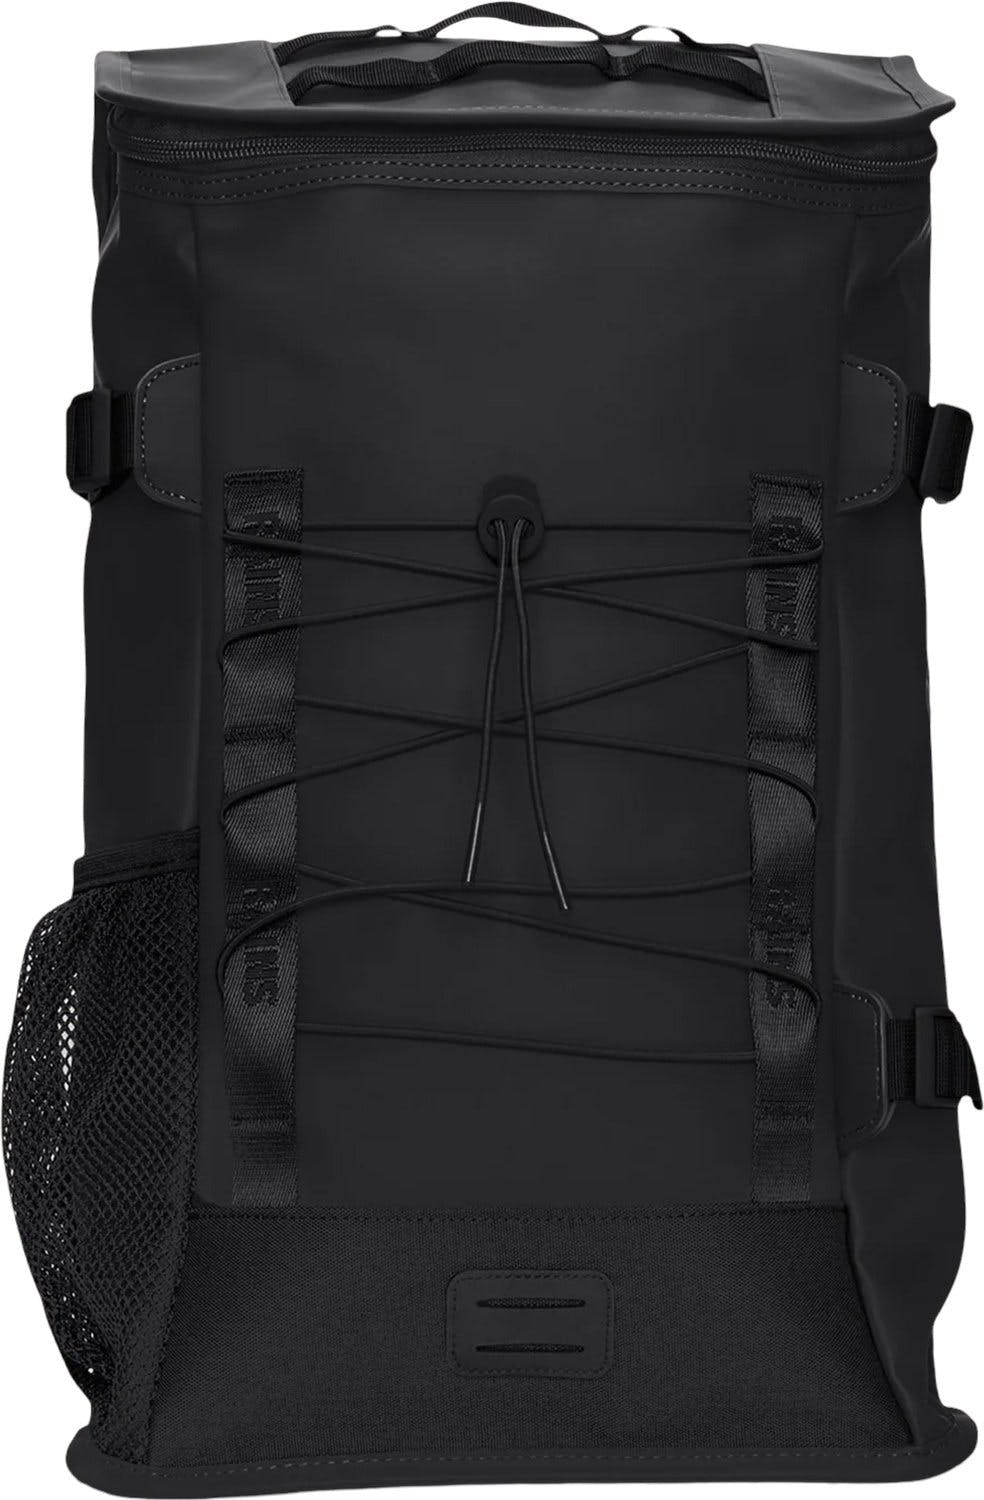 Product image for Trail Mountaineer Bag 22L